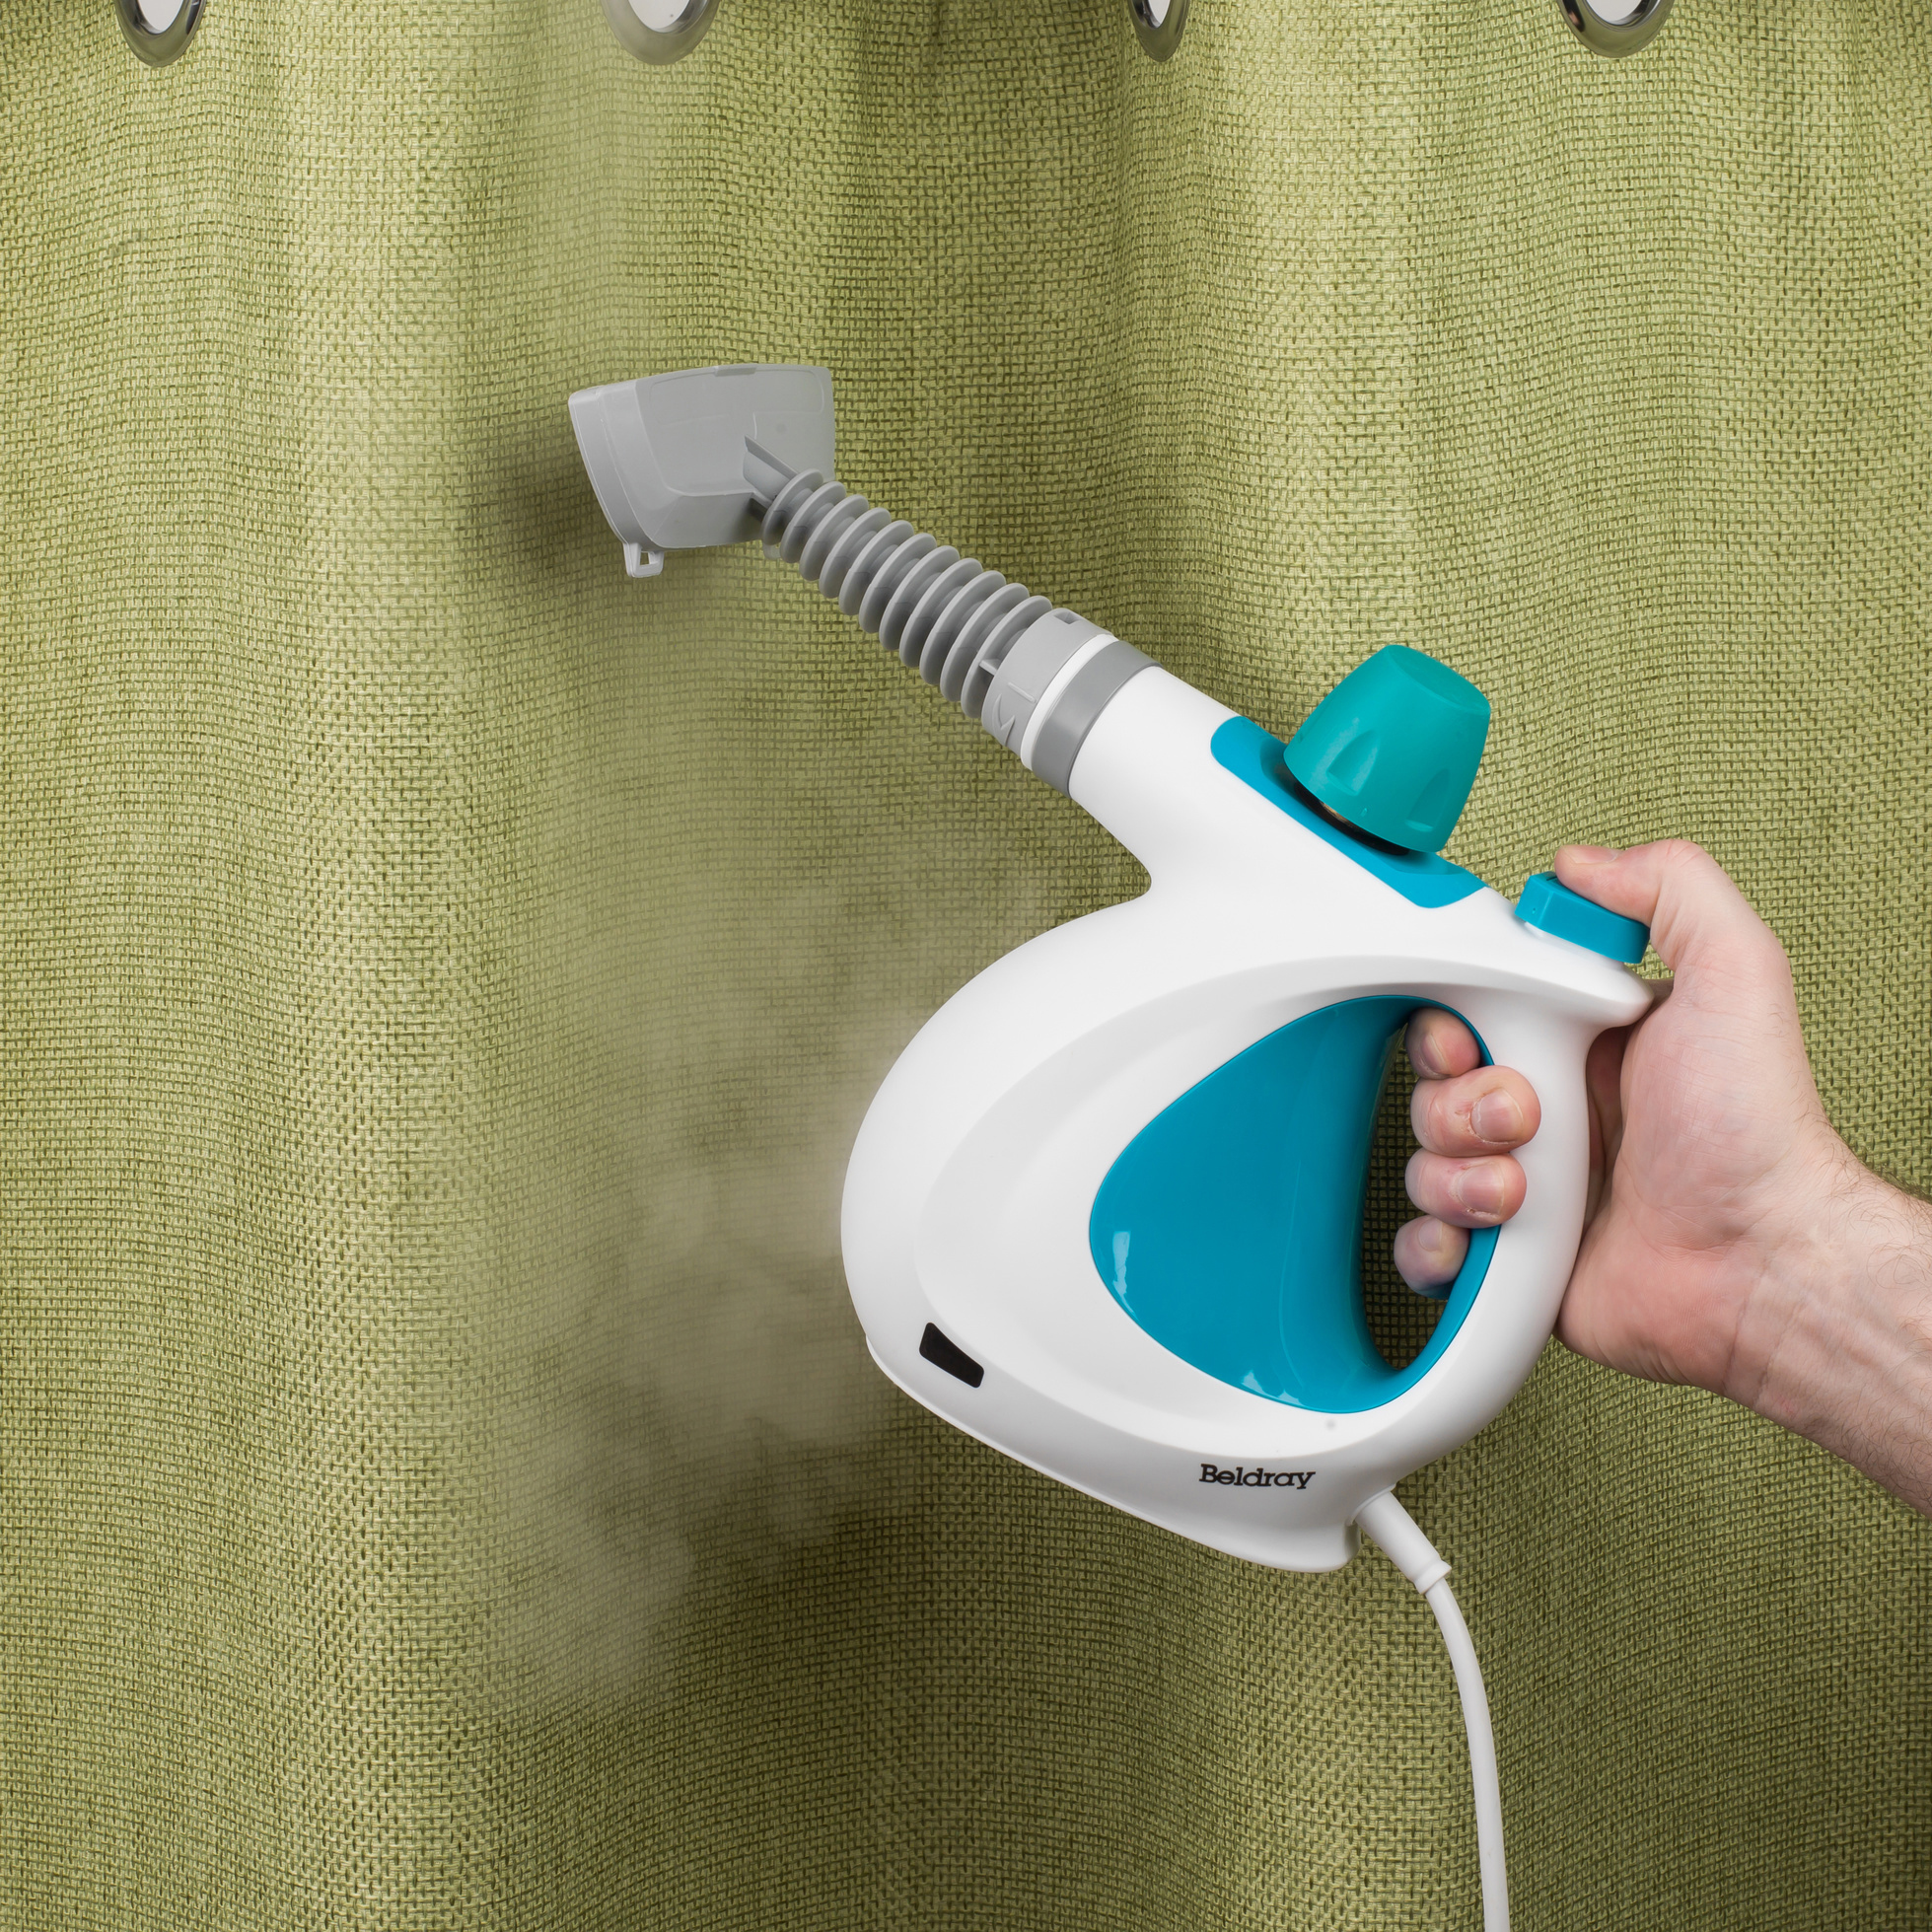 a handheld steam cleaner being used on curtains